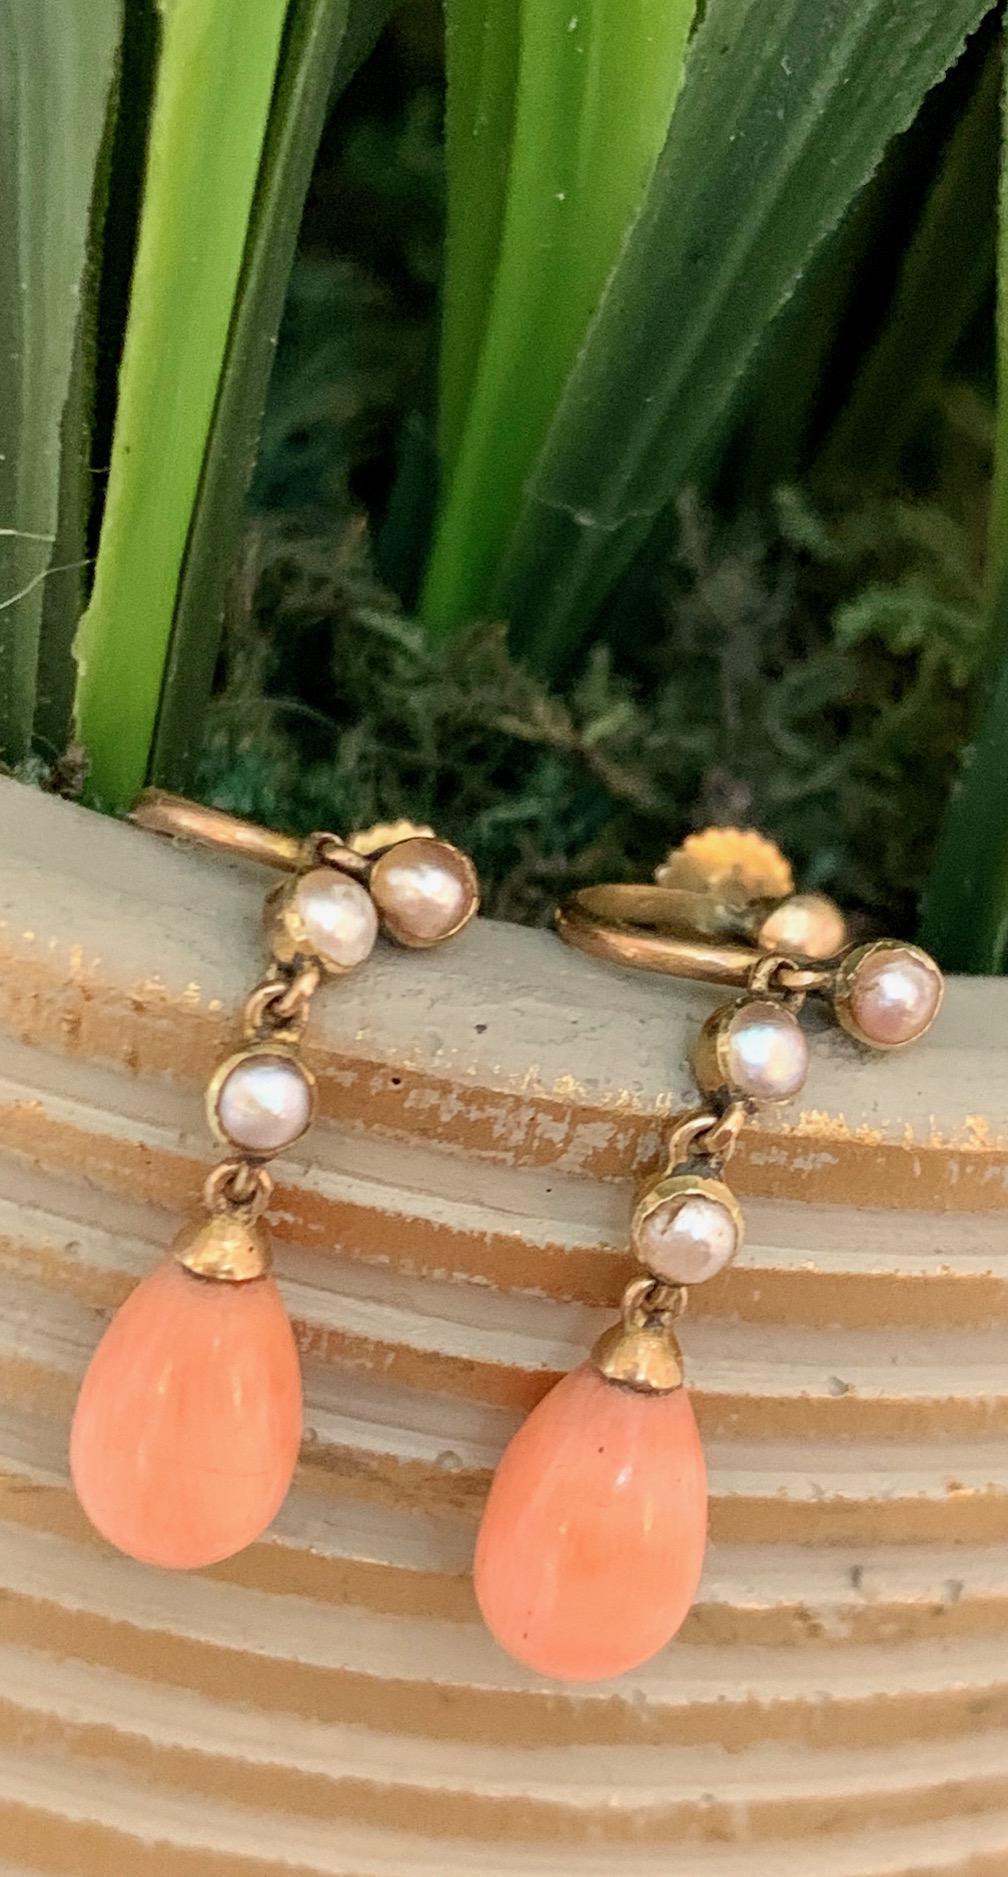 These simply lovely earrings each feature a 10mm teardrop-shaped salmon Coral stone.  Accents are provided by 3-2.5mm half Pearls on each earring.

Weight: 2.3 grams